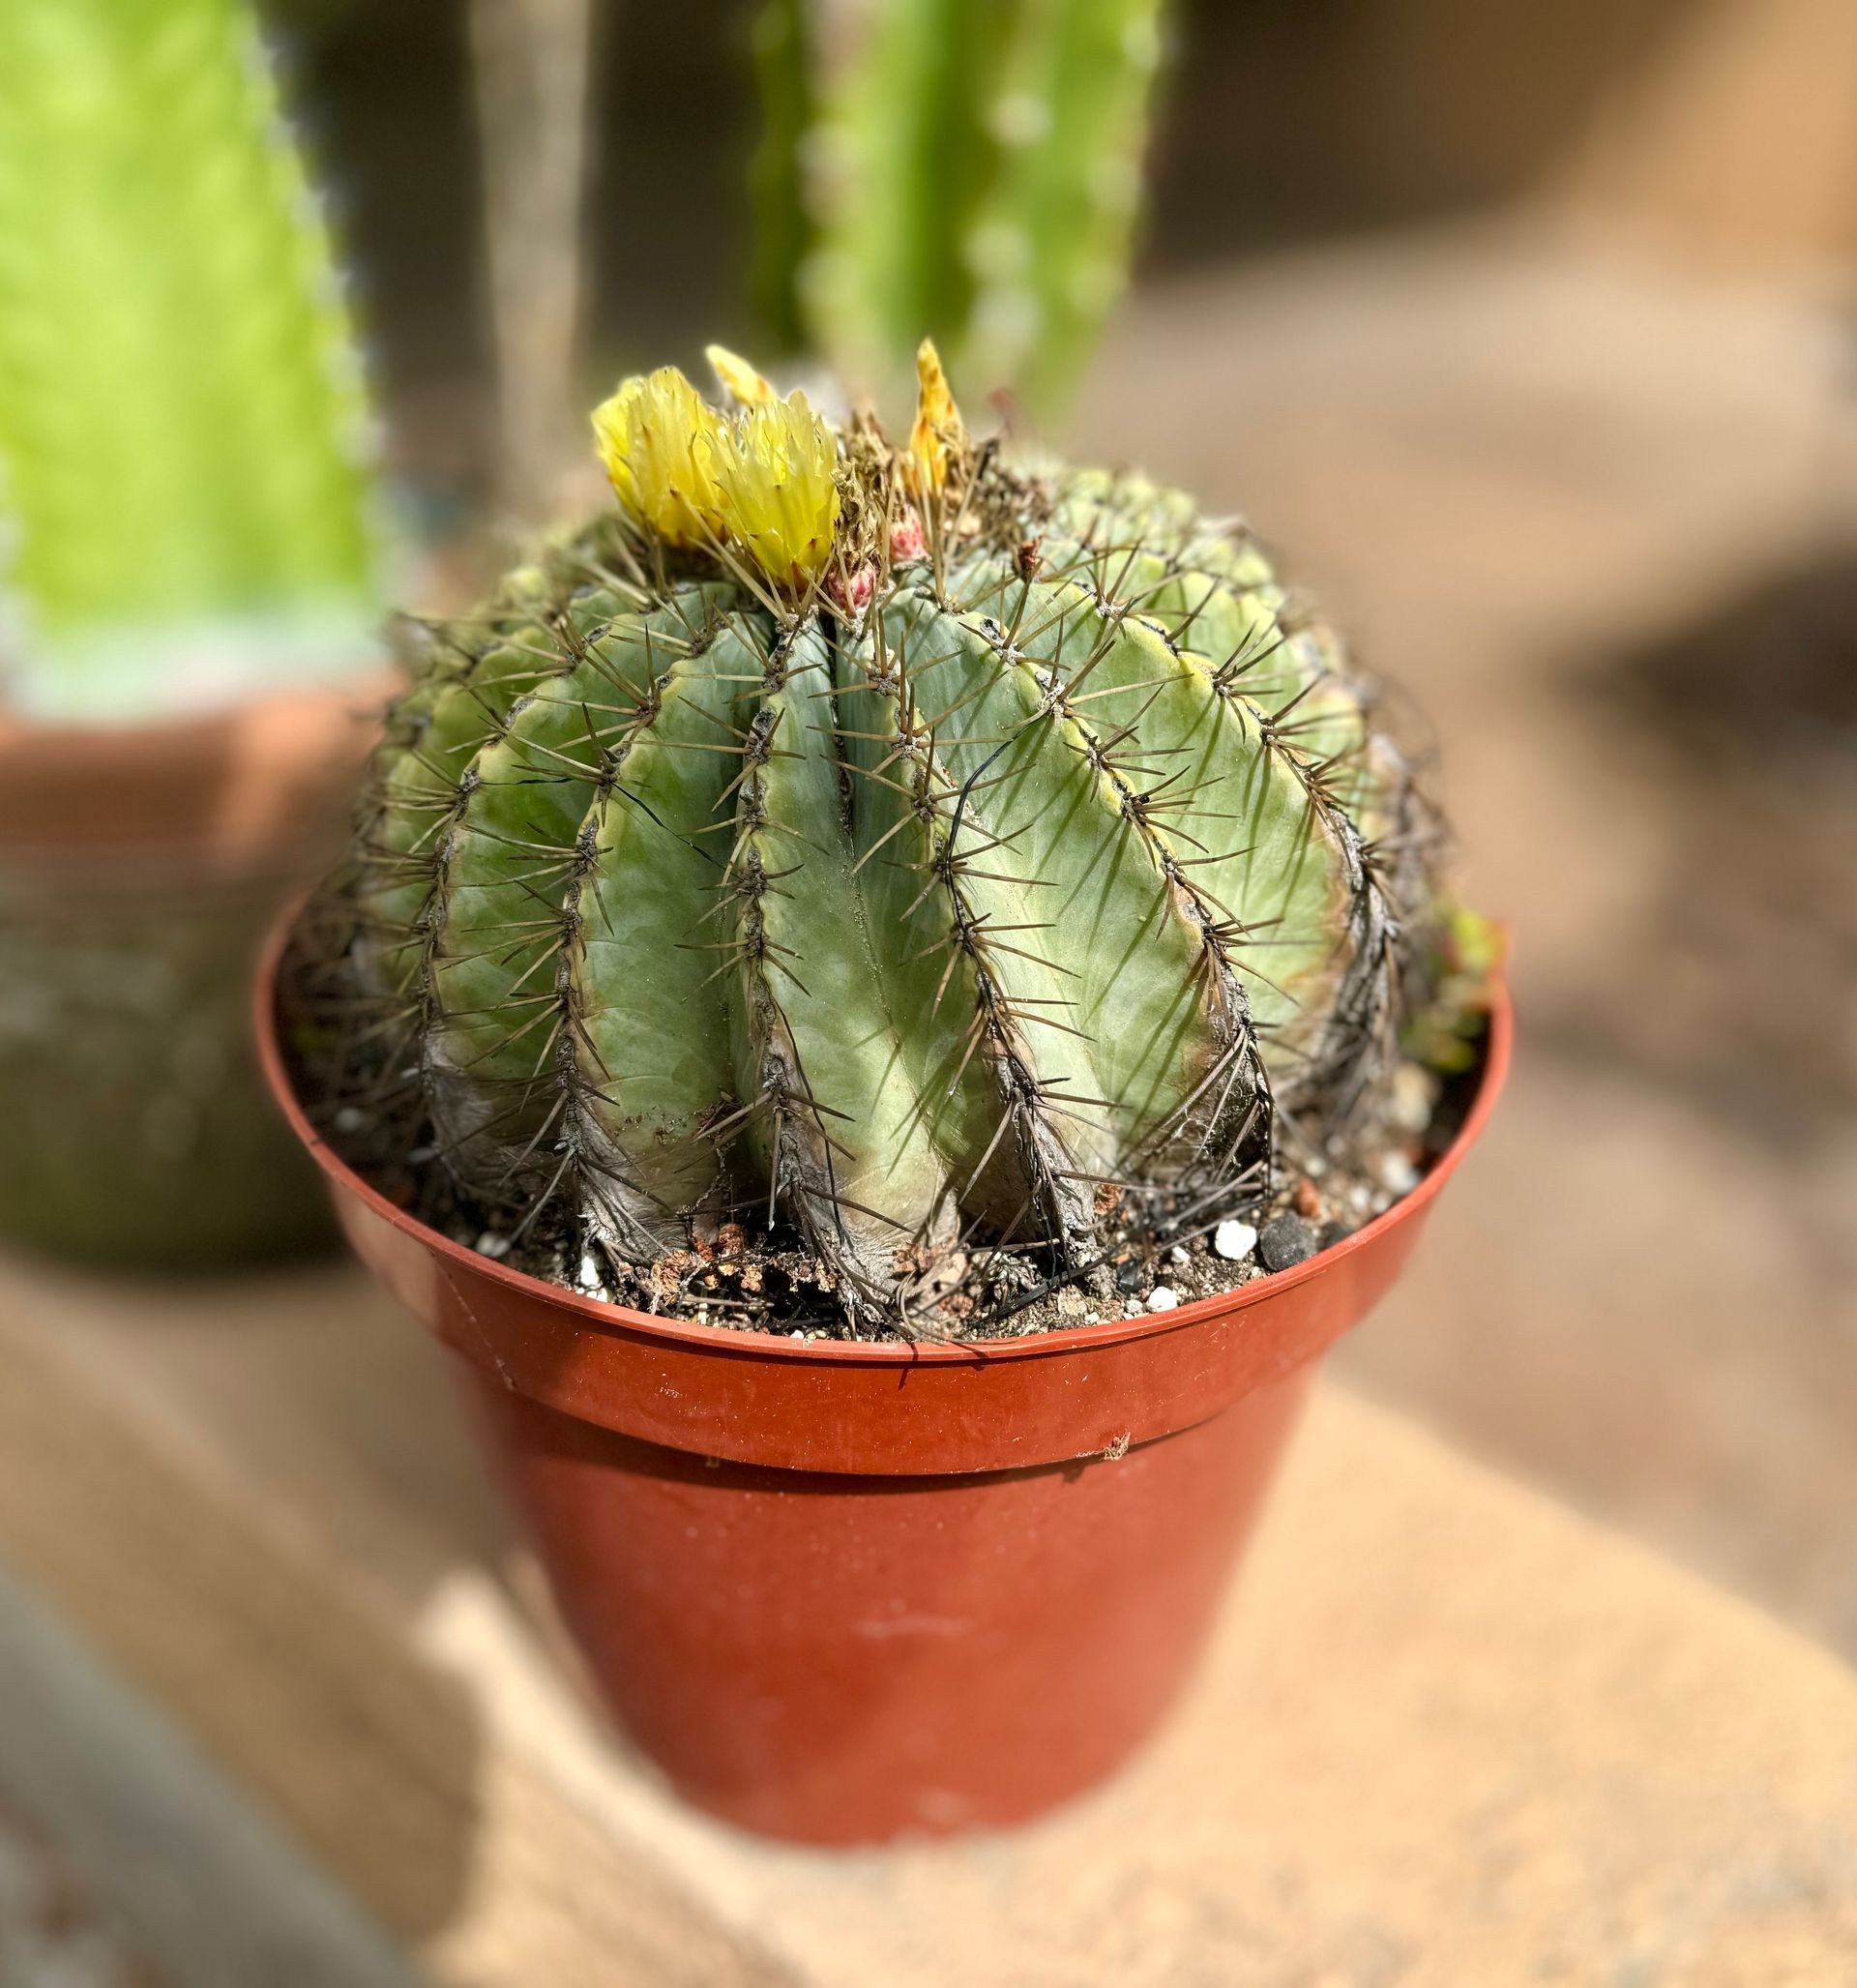 A small cactus in a brown pot is sitting on a wooden table.